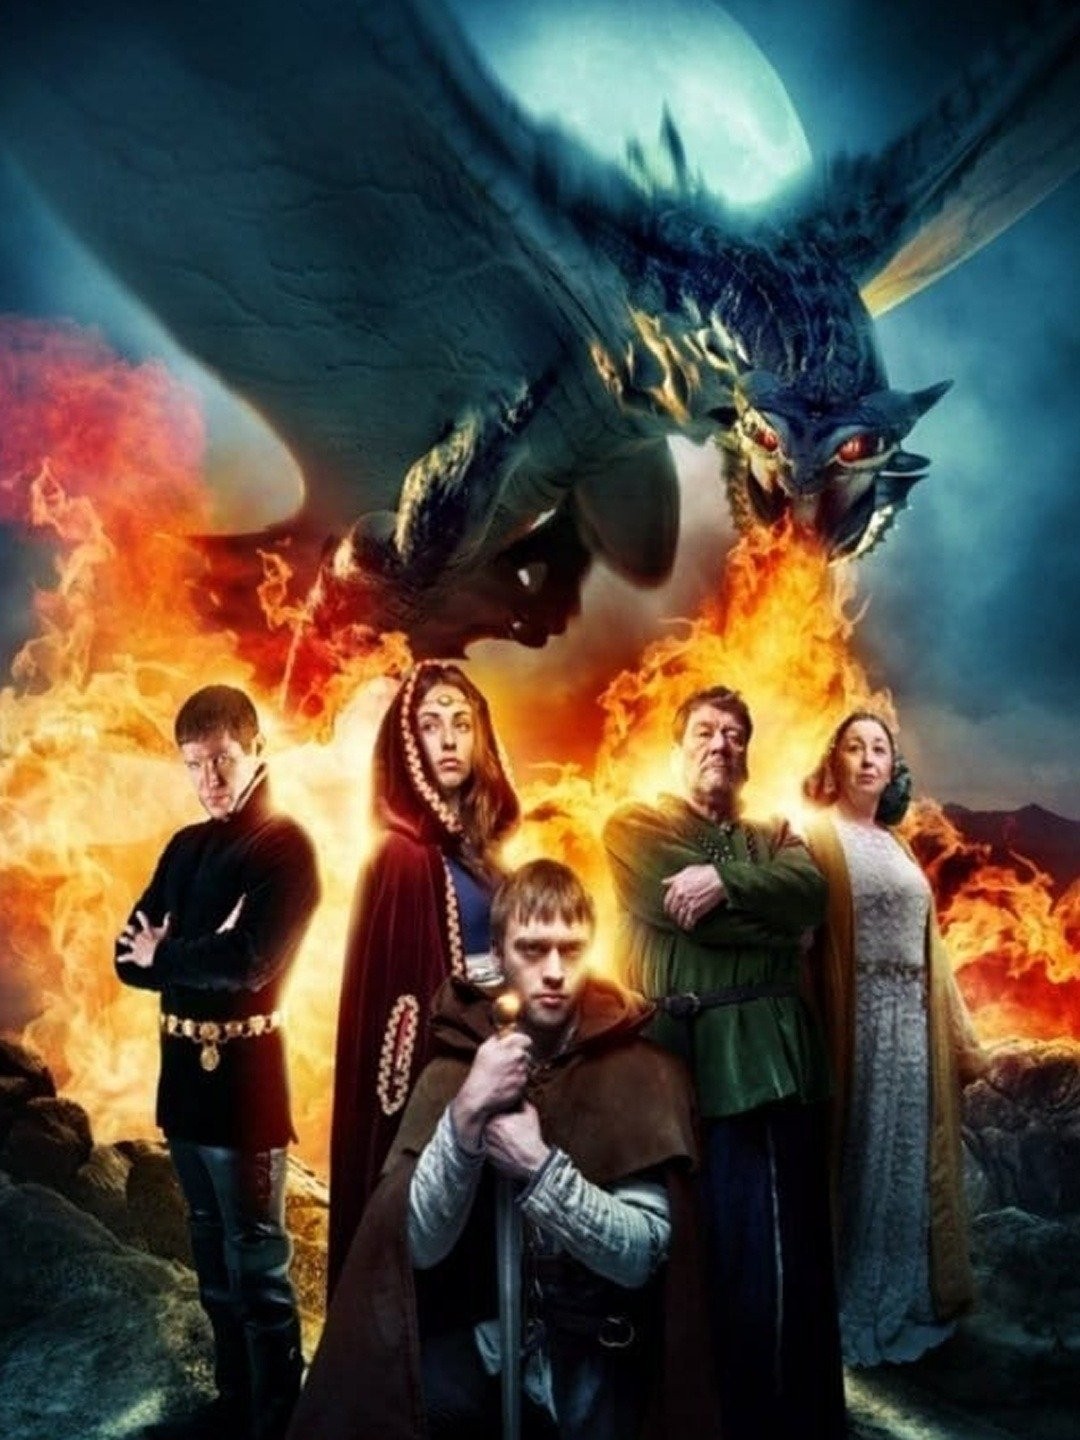 Dragonslayer streaming: where to watch movie online?